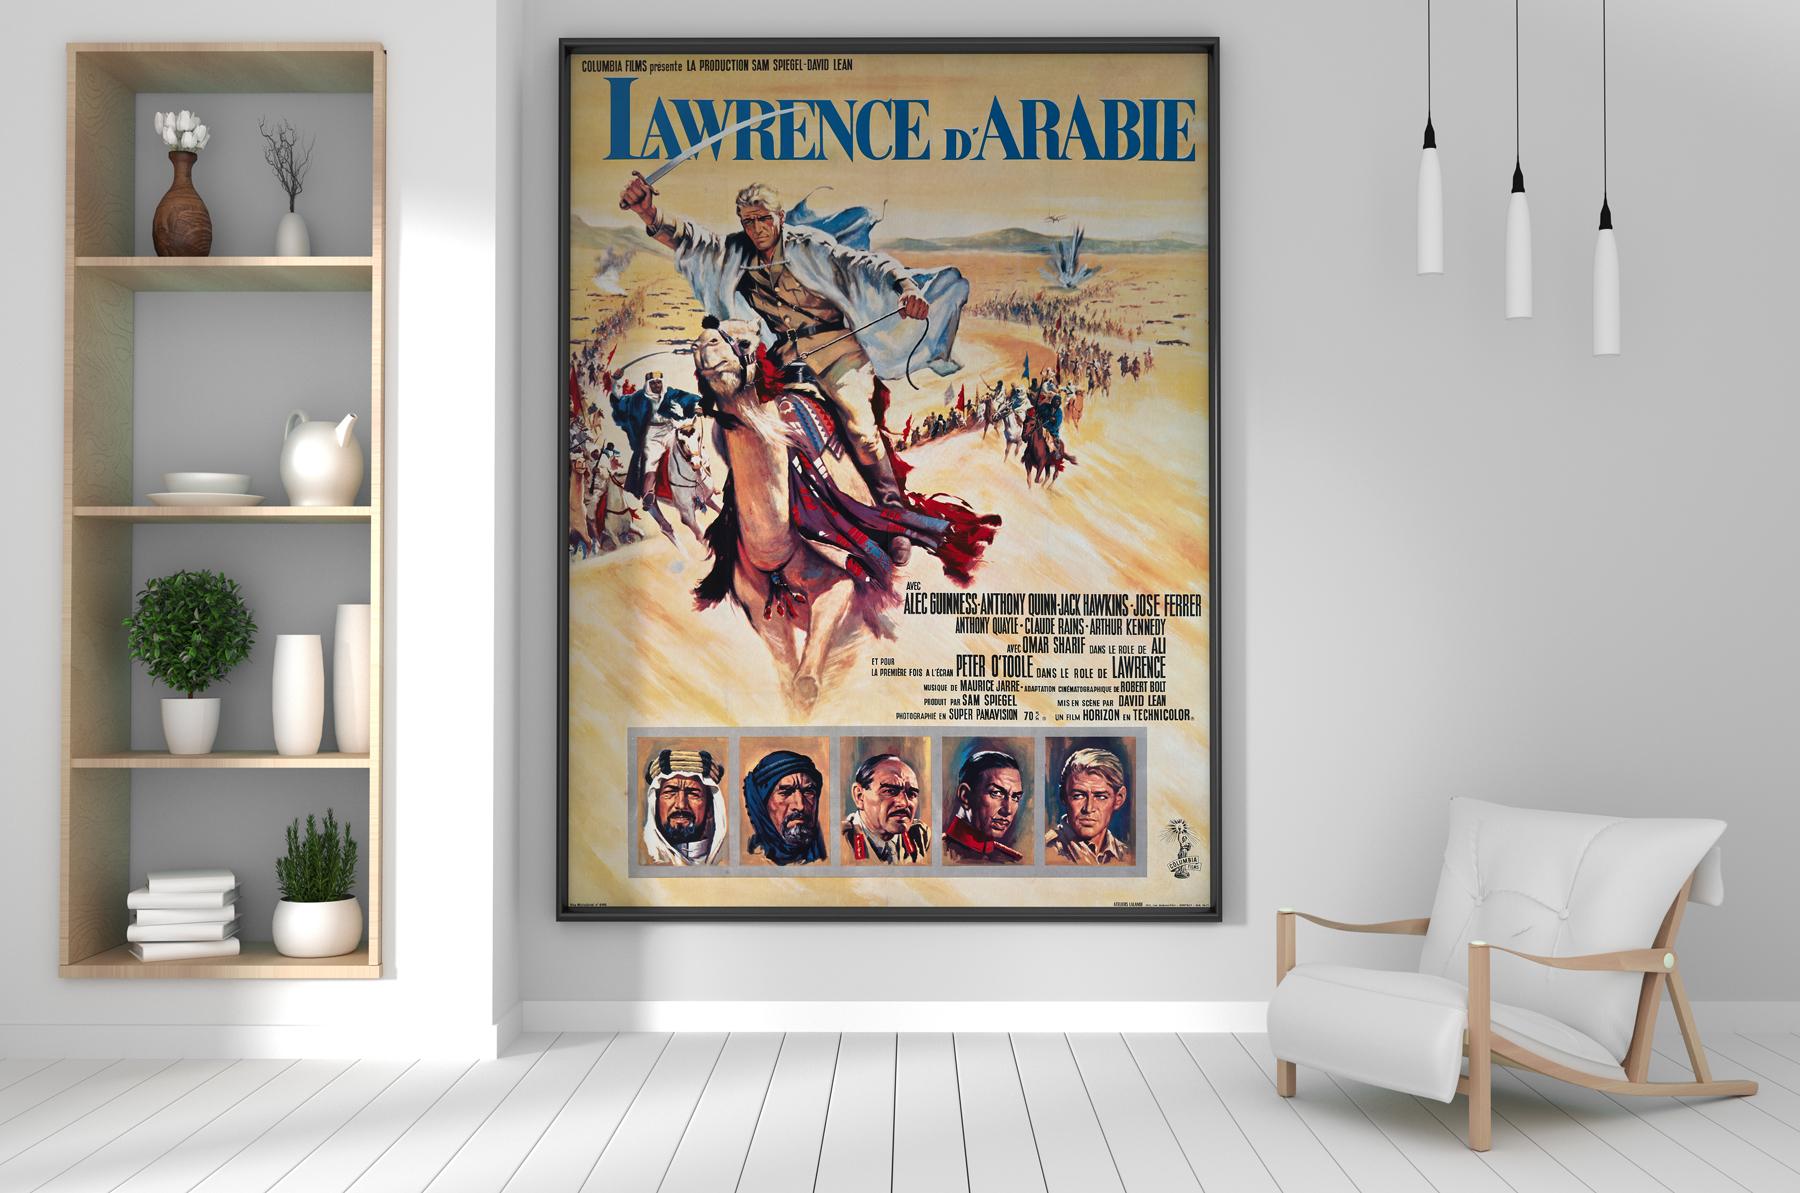 Wonderful first-year-of-release French Grande film poster for bonafide classic Lawrence of Arabia.  

Lawrence of Arabia, undoubtedly one of the most celebrated epics in the history of cinema, starred Peter O'Toole, Alec Guinness and Anthony Quinn.